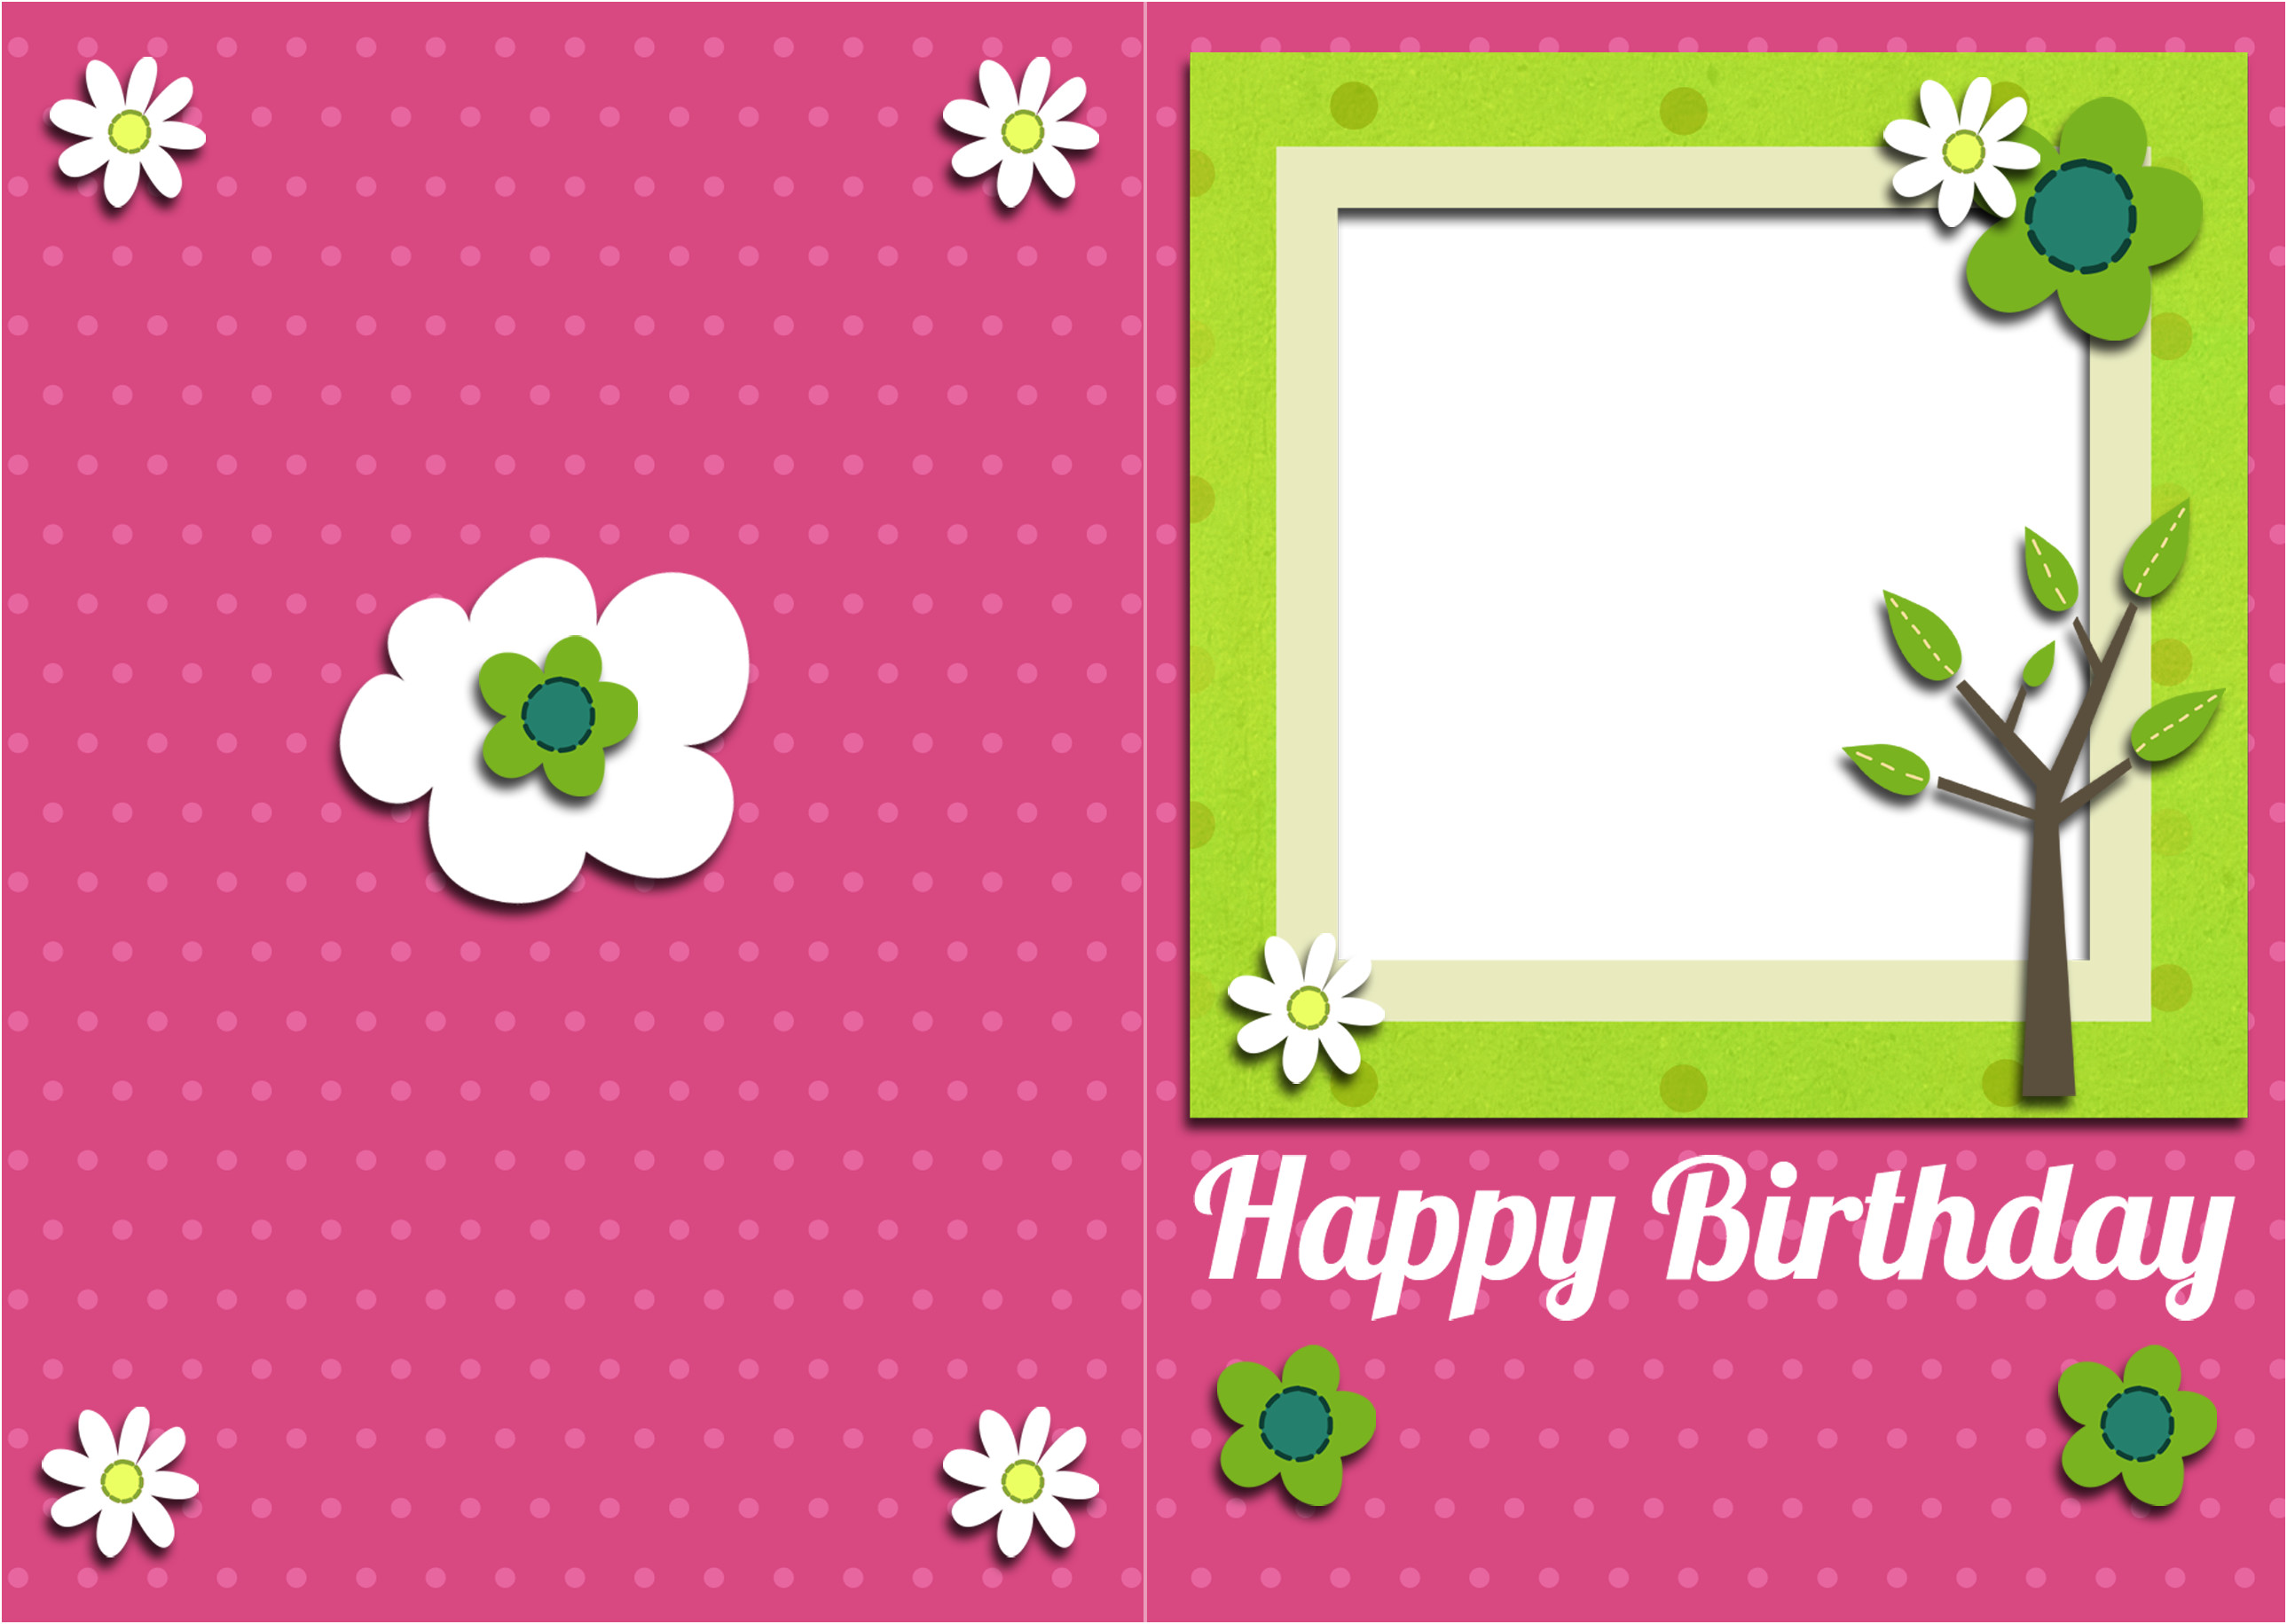 Birthday Card Backgrounds ·① WallpaperTag